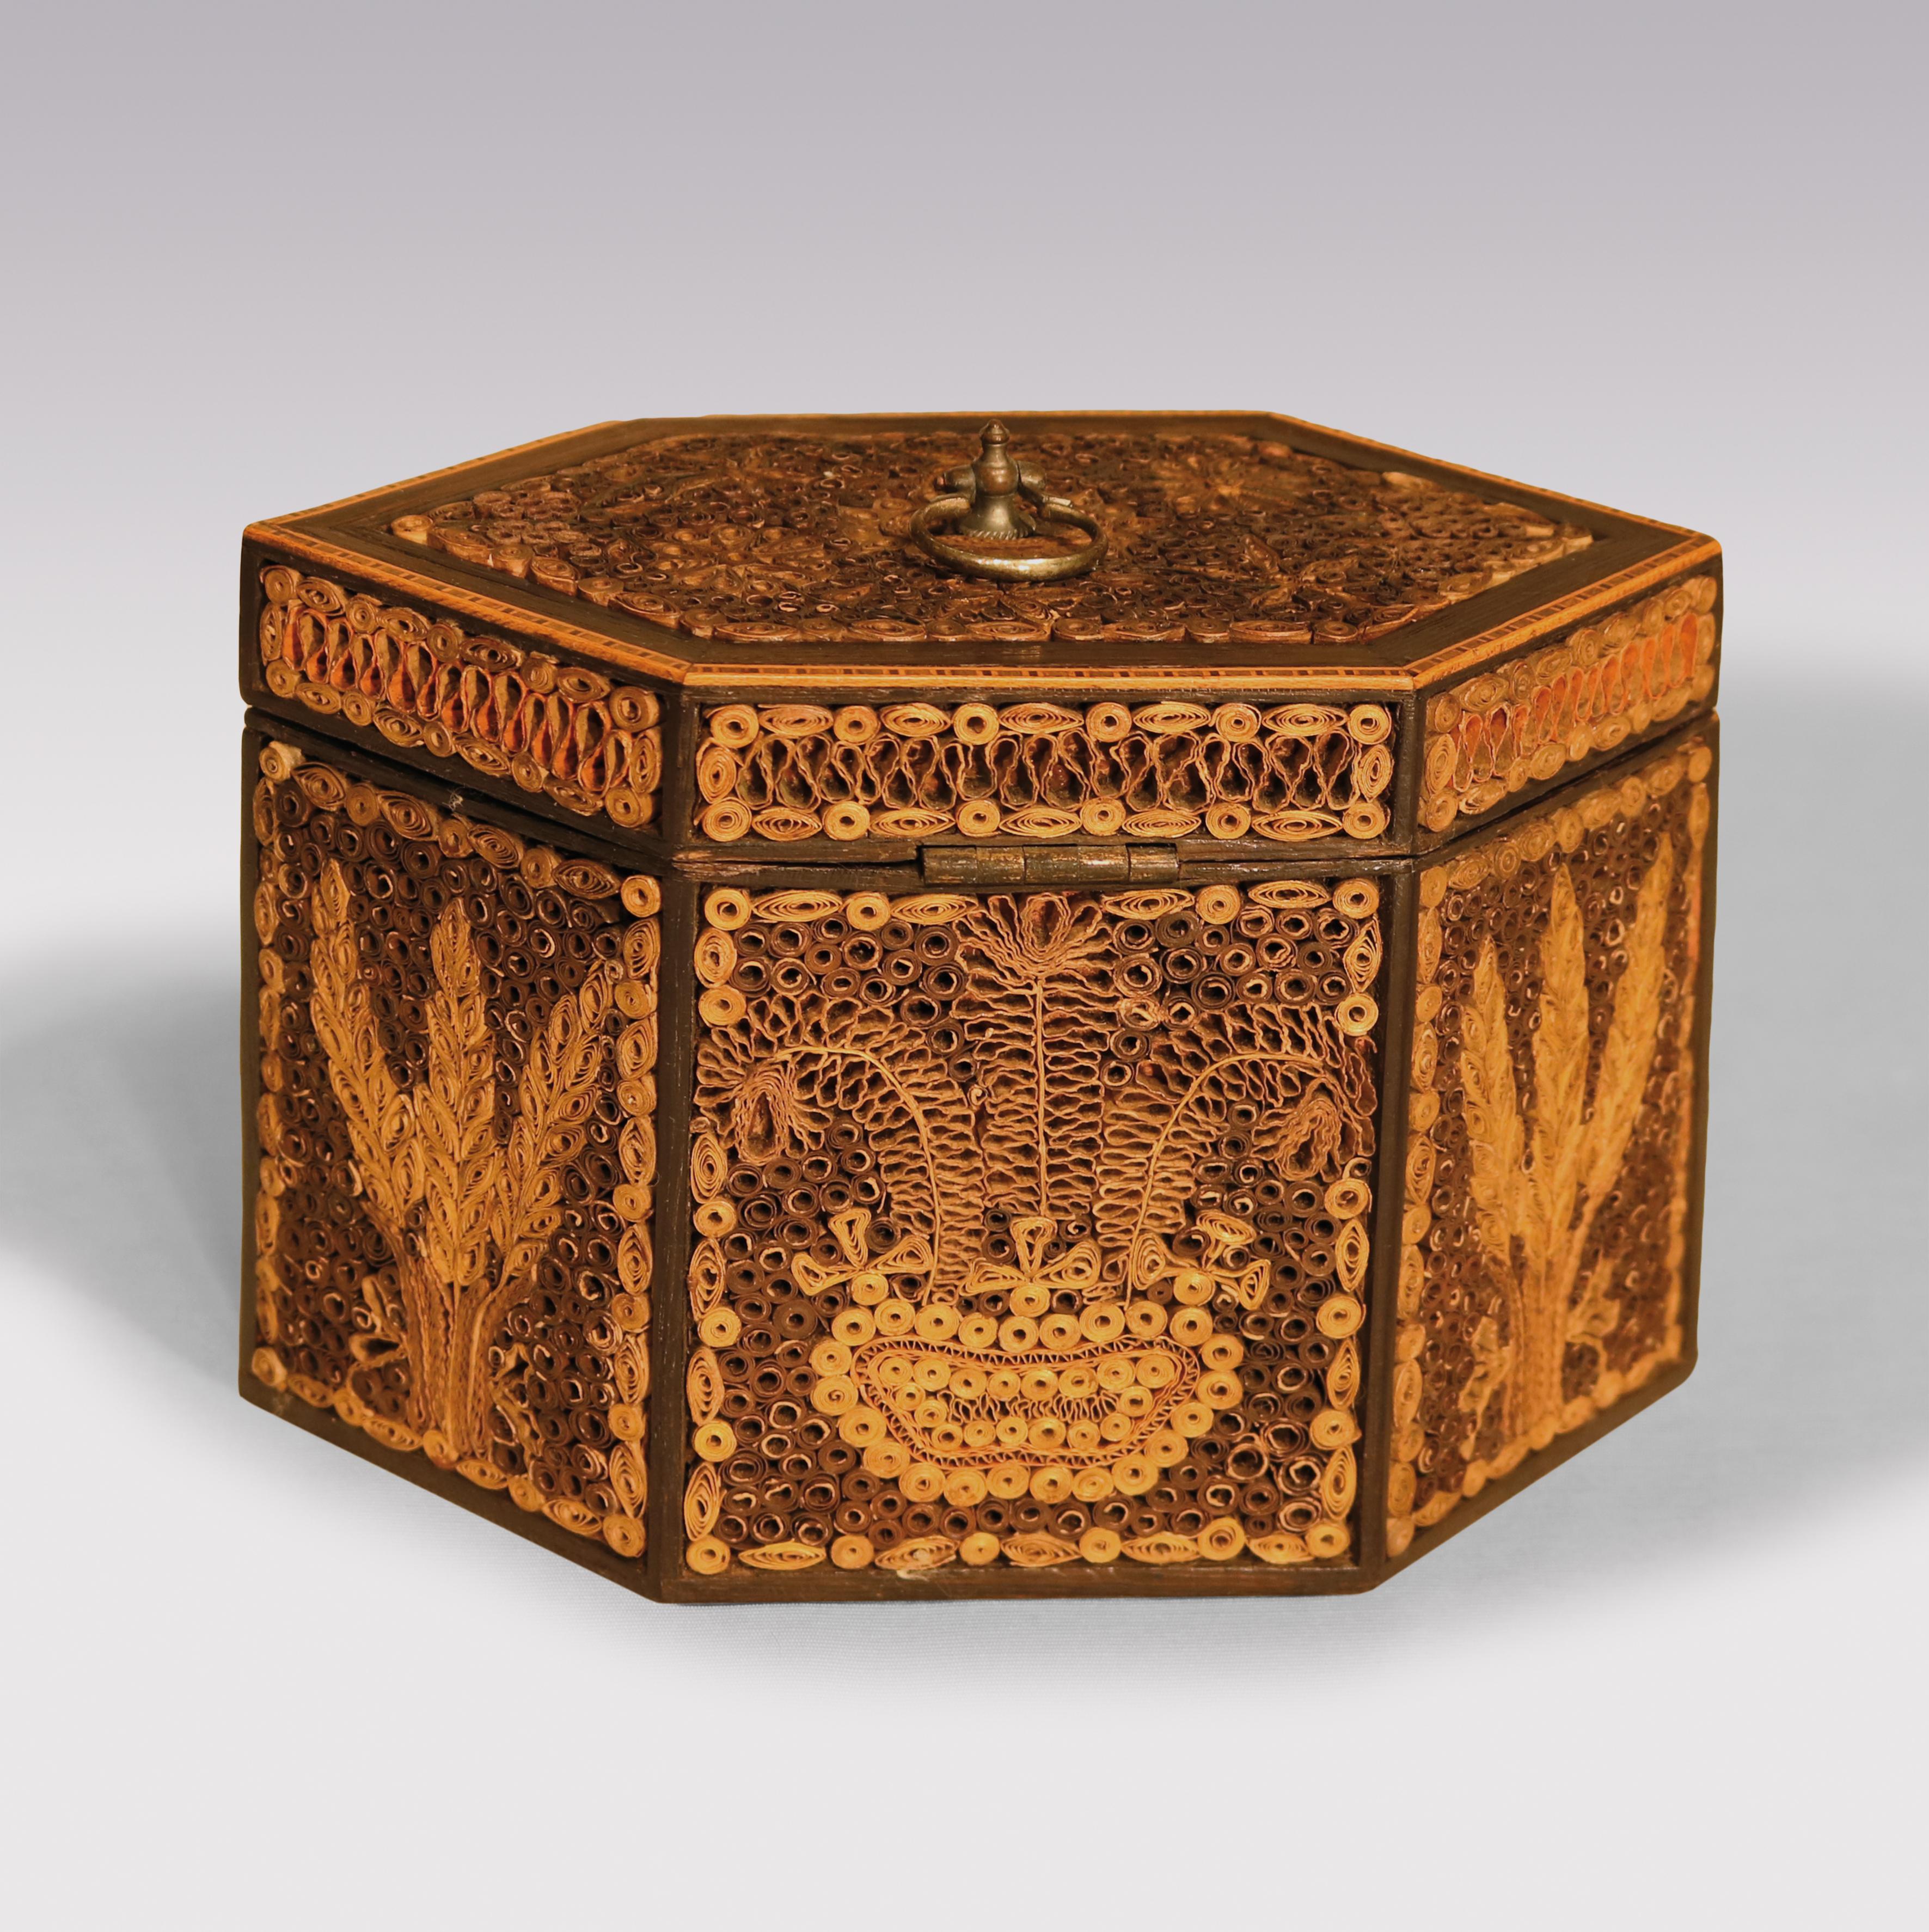 A fine late 18th century octagonal paper scrollwork tea caddy decorated with vases of flowers and trees, retaining bright gilt detail.